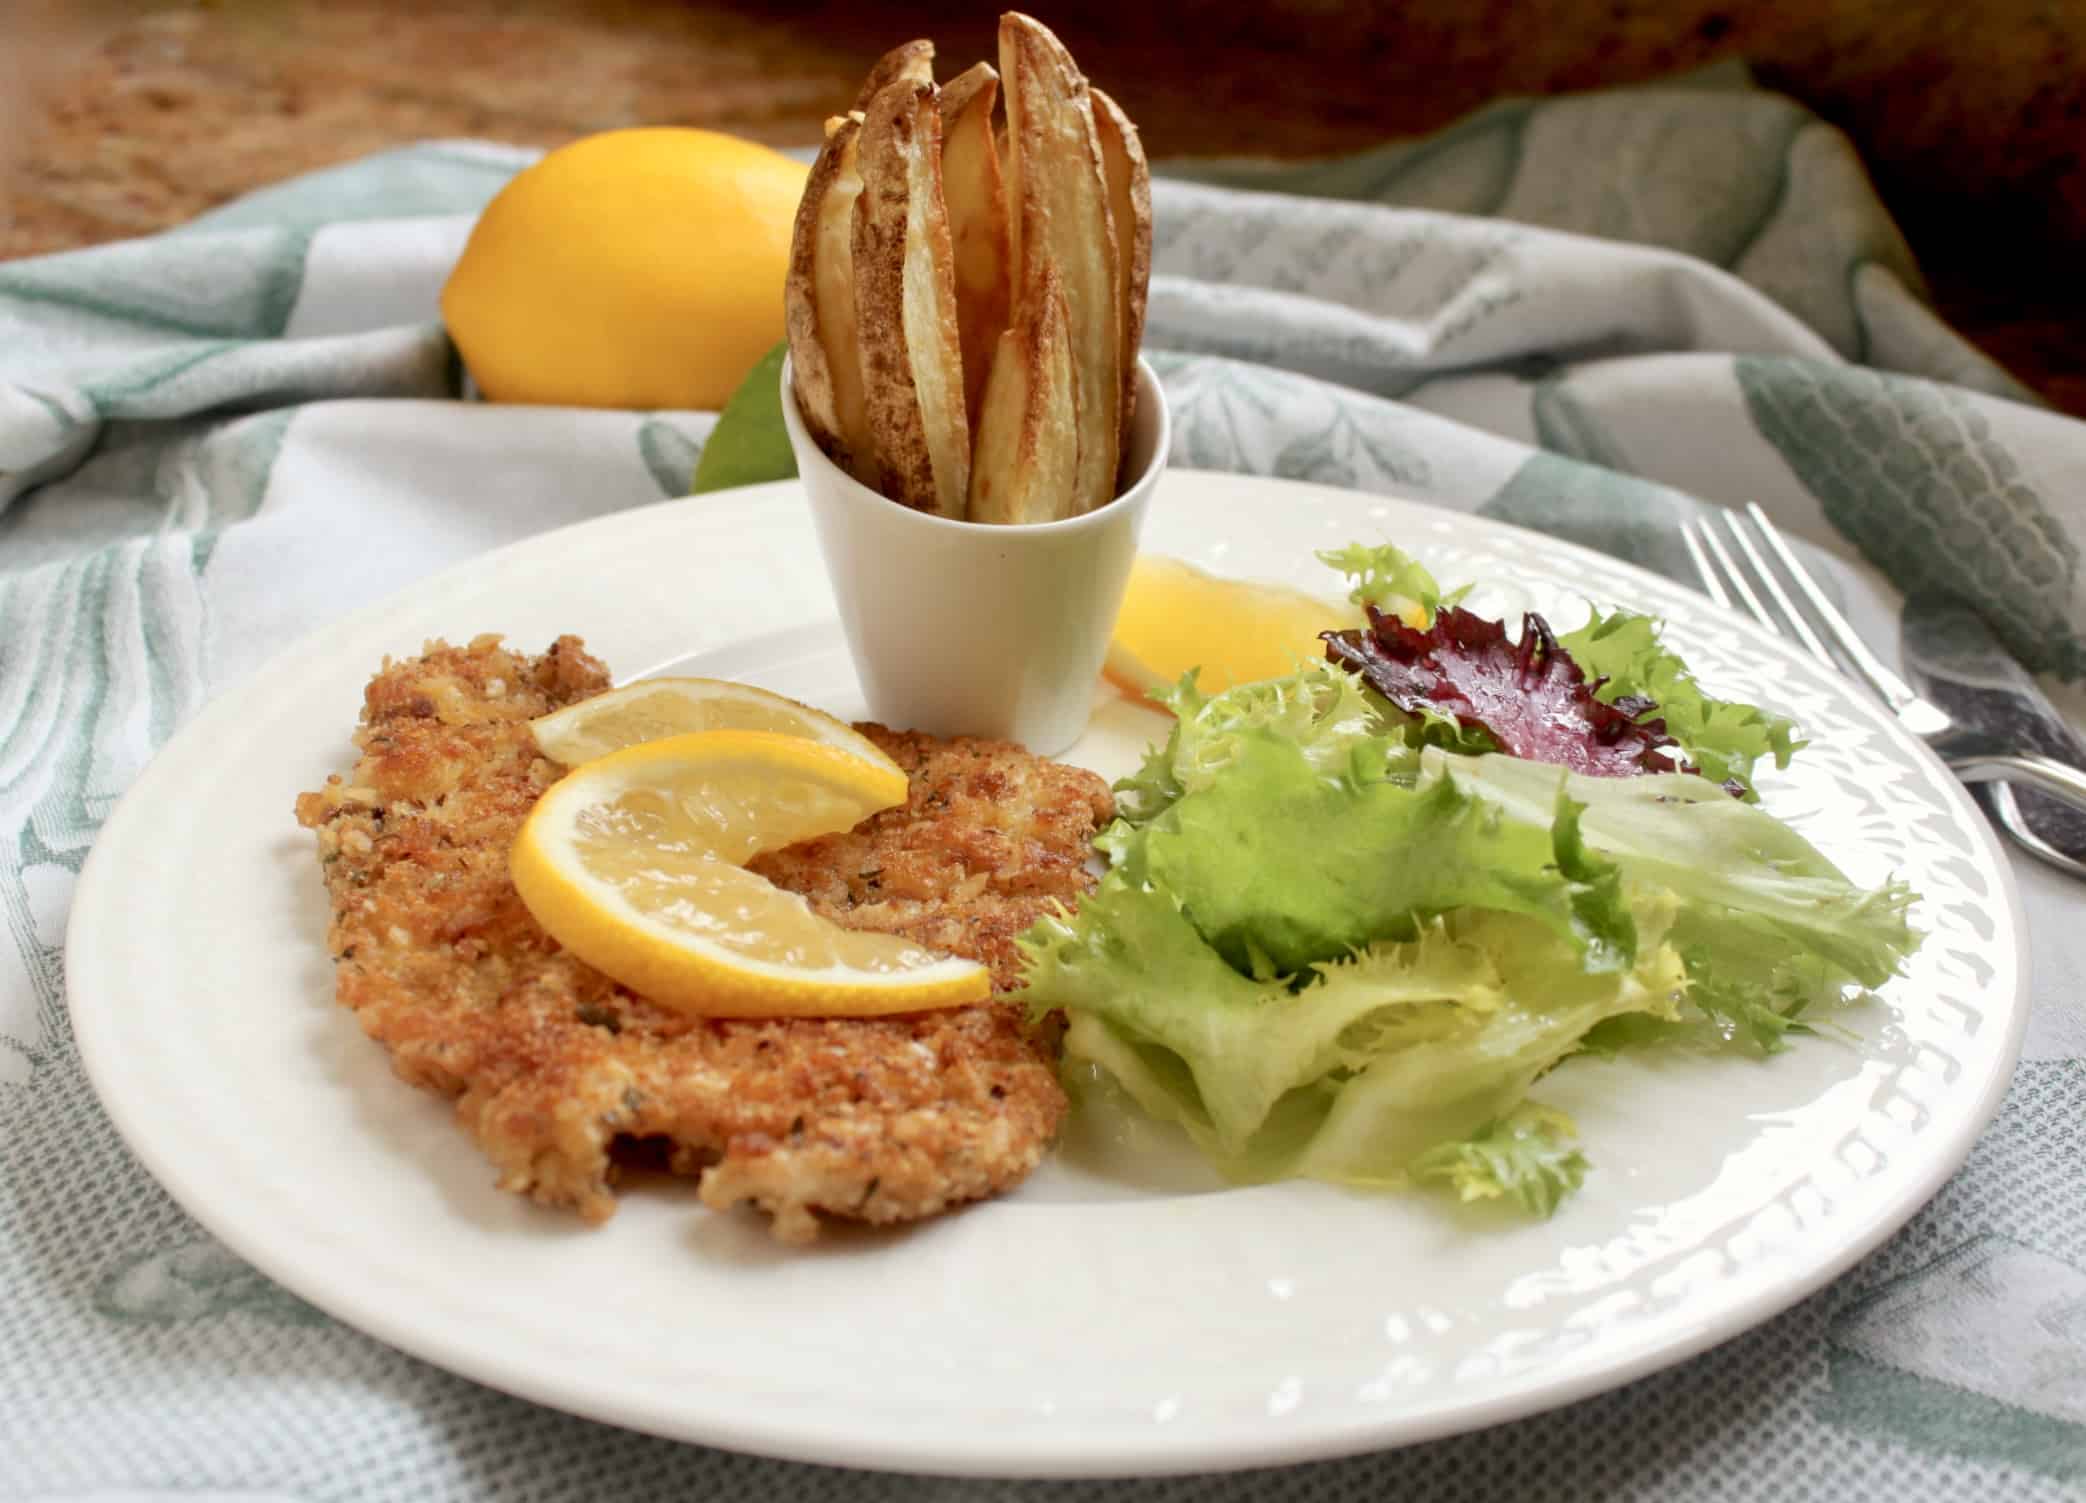 pork schnitzel on a plate with fries and salad